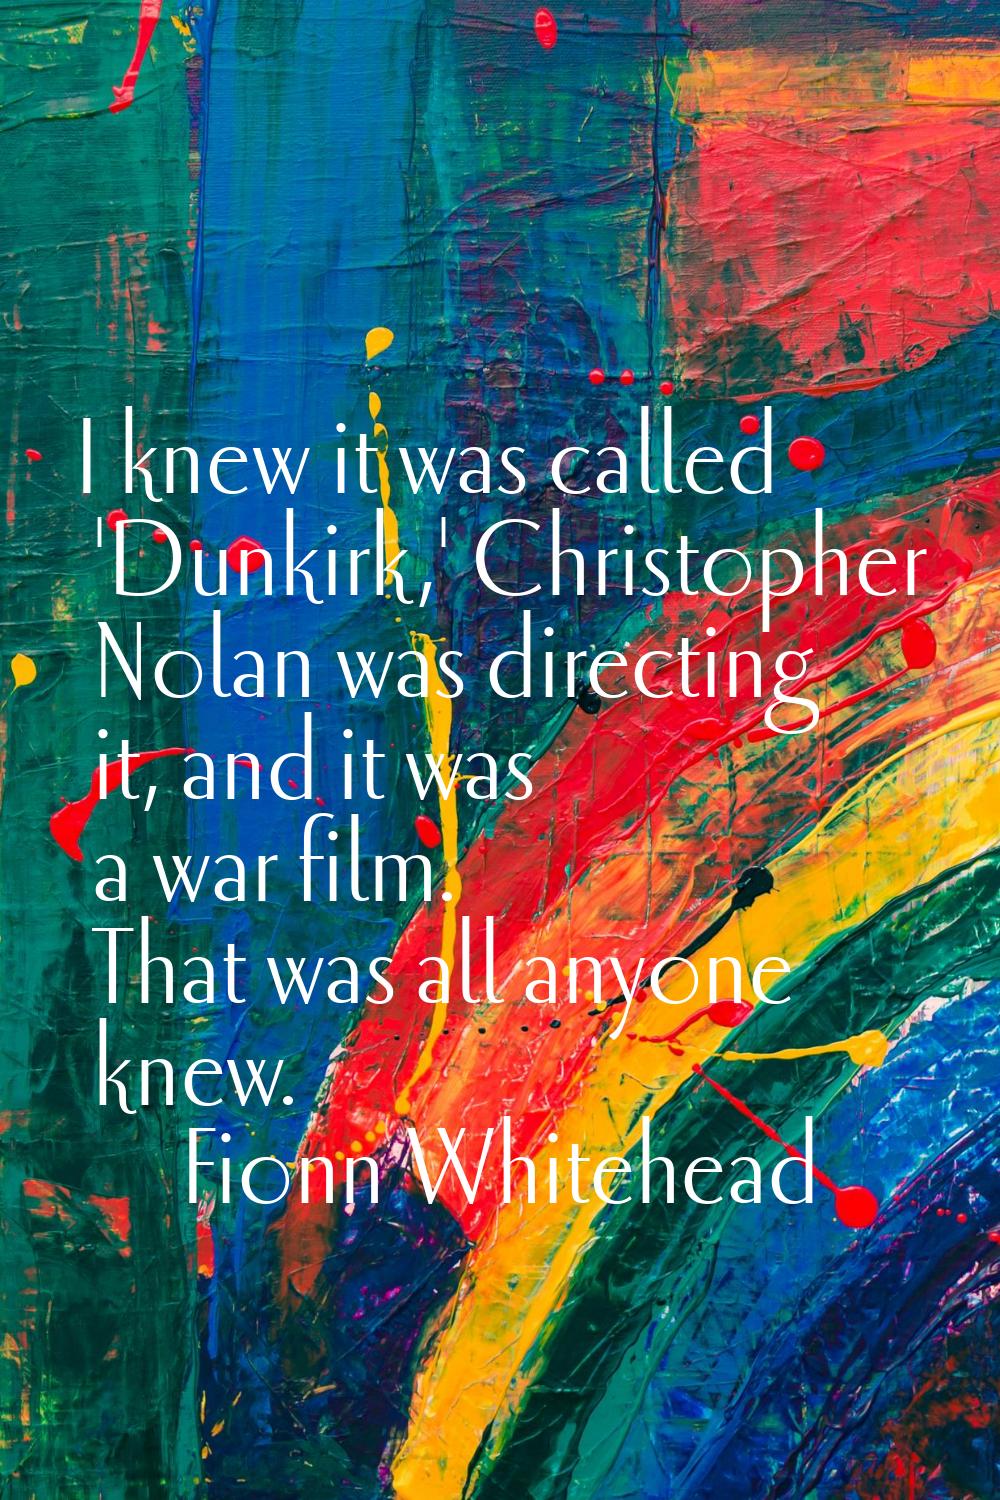 I knew it was called 'Dunkirk,' Christopher Nolan was directing it, and it was a war film. That was